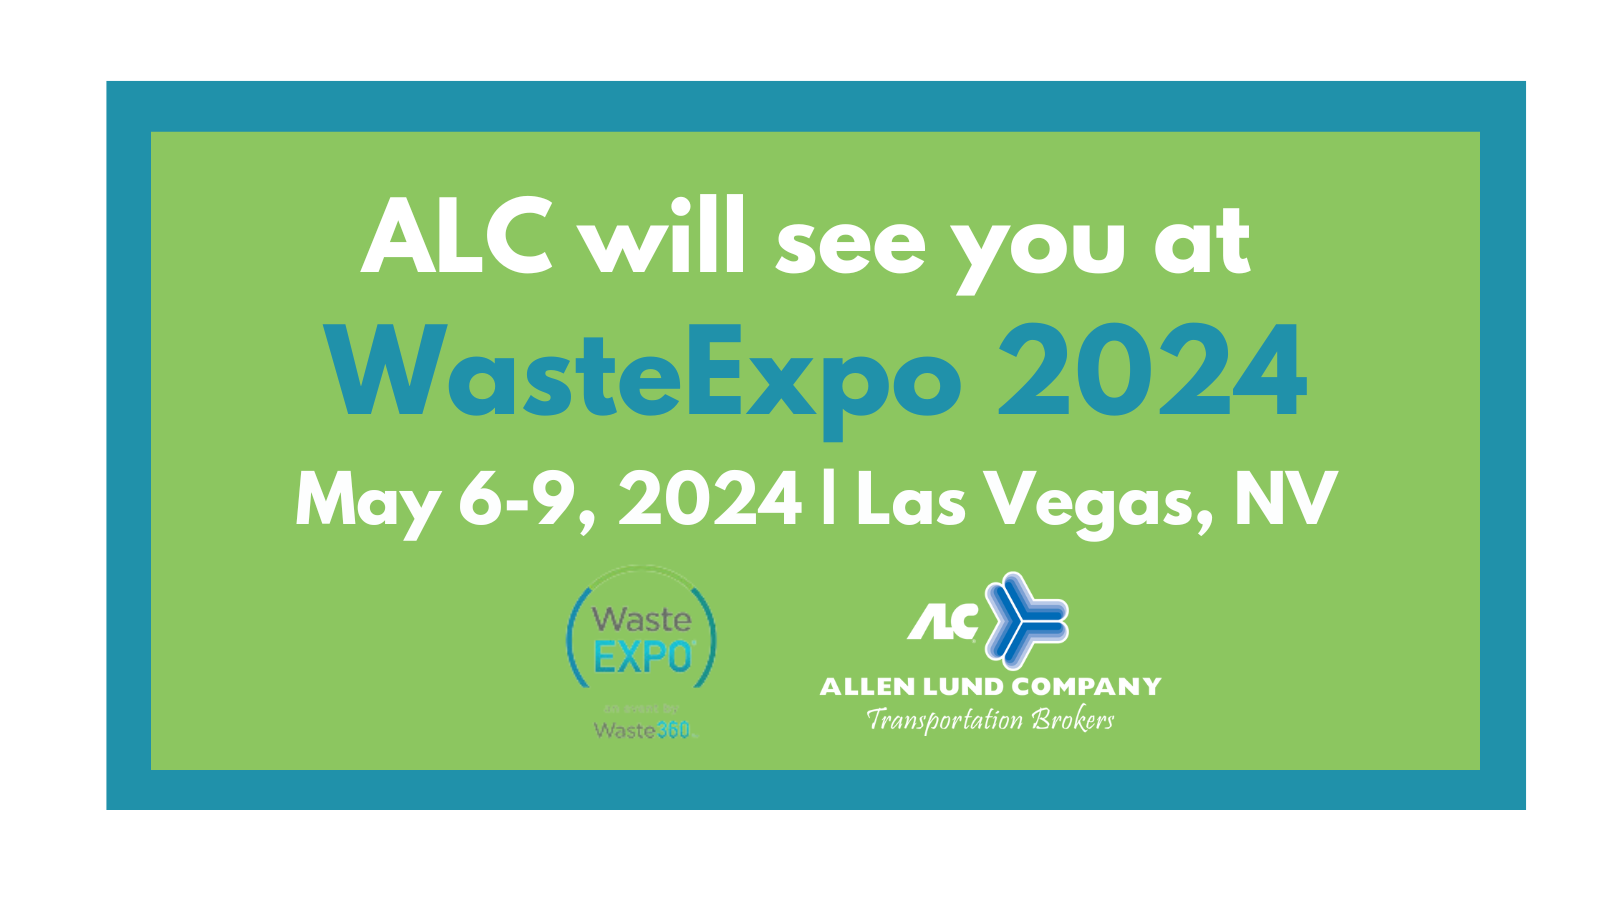 ALC will be attending WasteExpo 2024